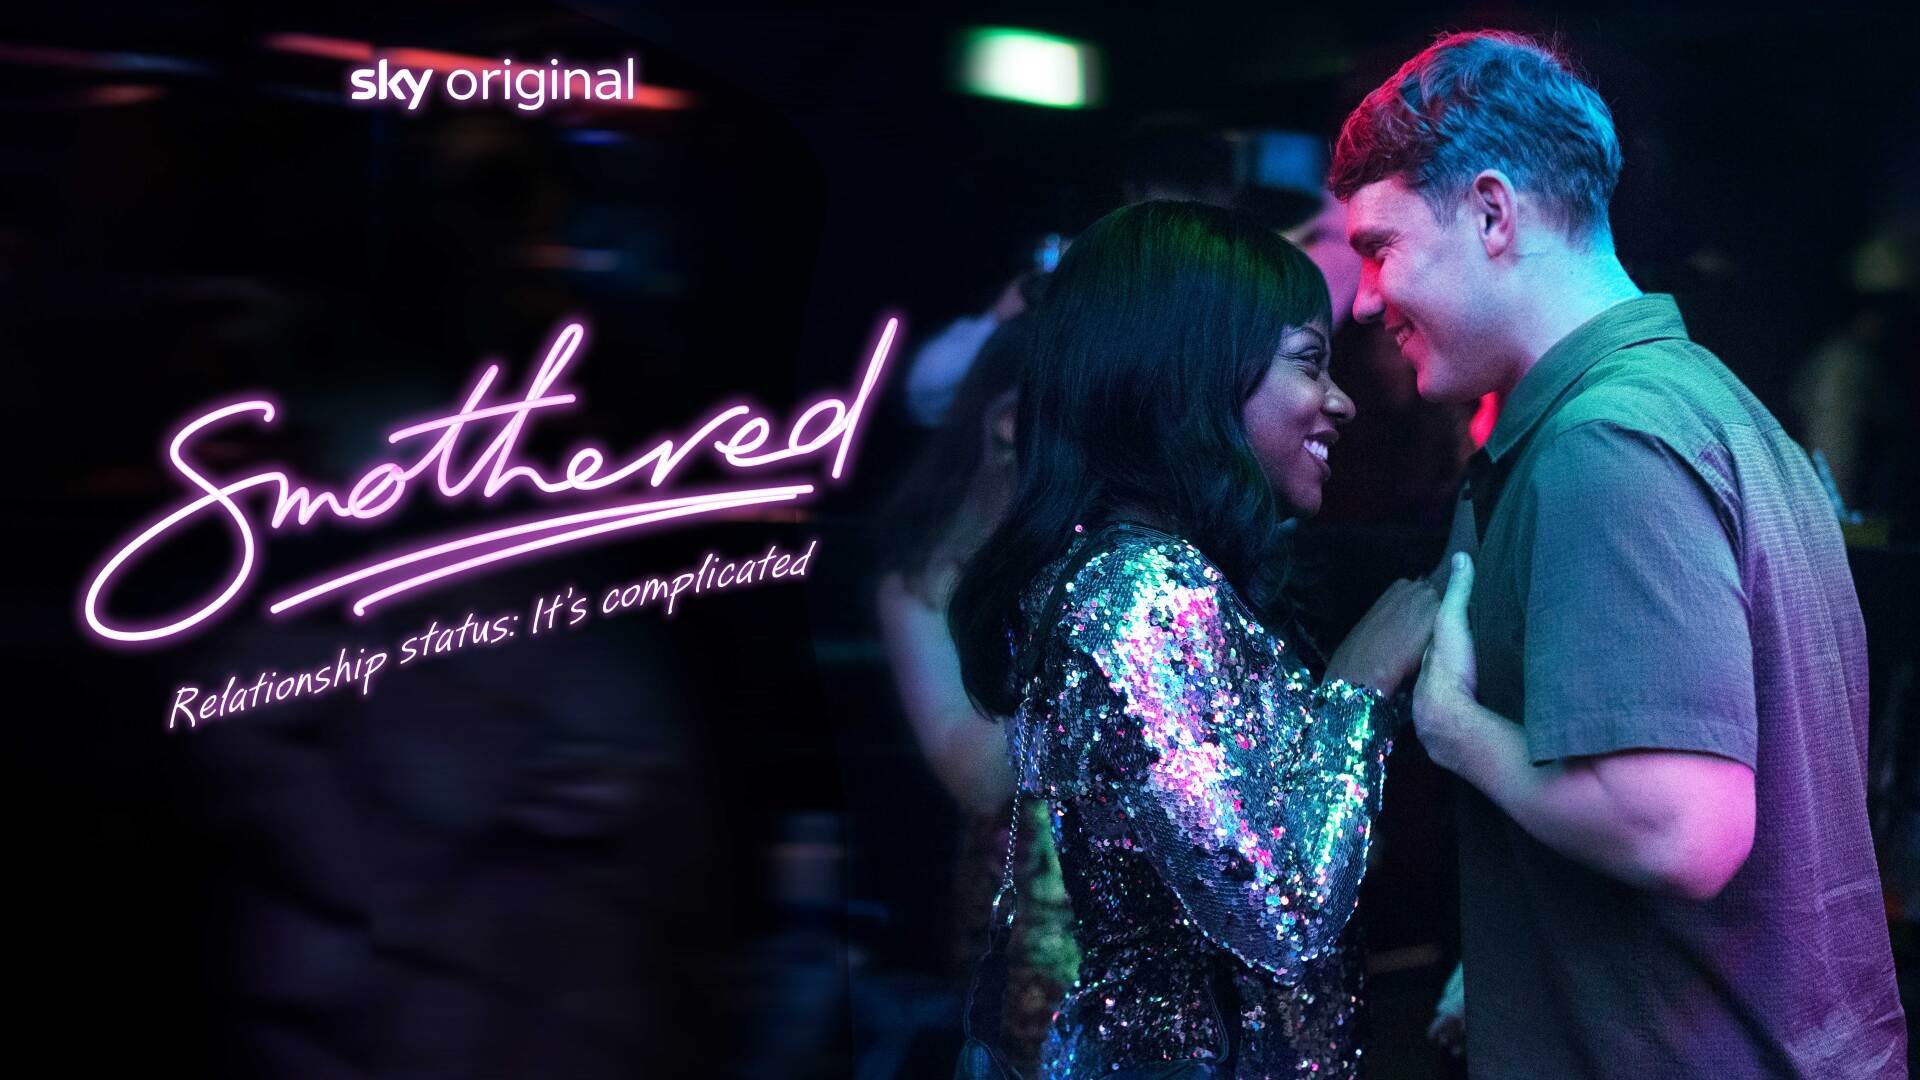 Smothered Season 1 - watch full episodes streaming online